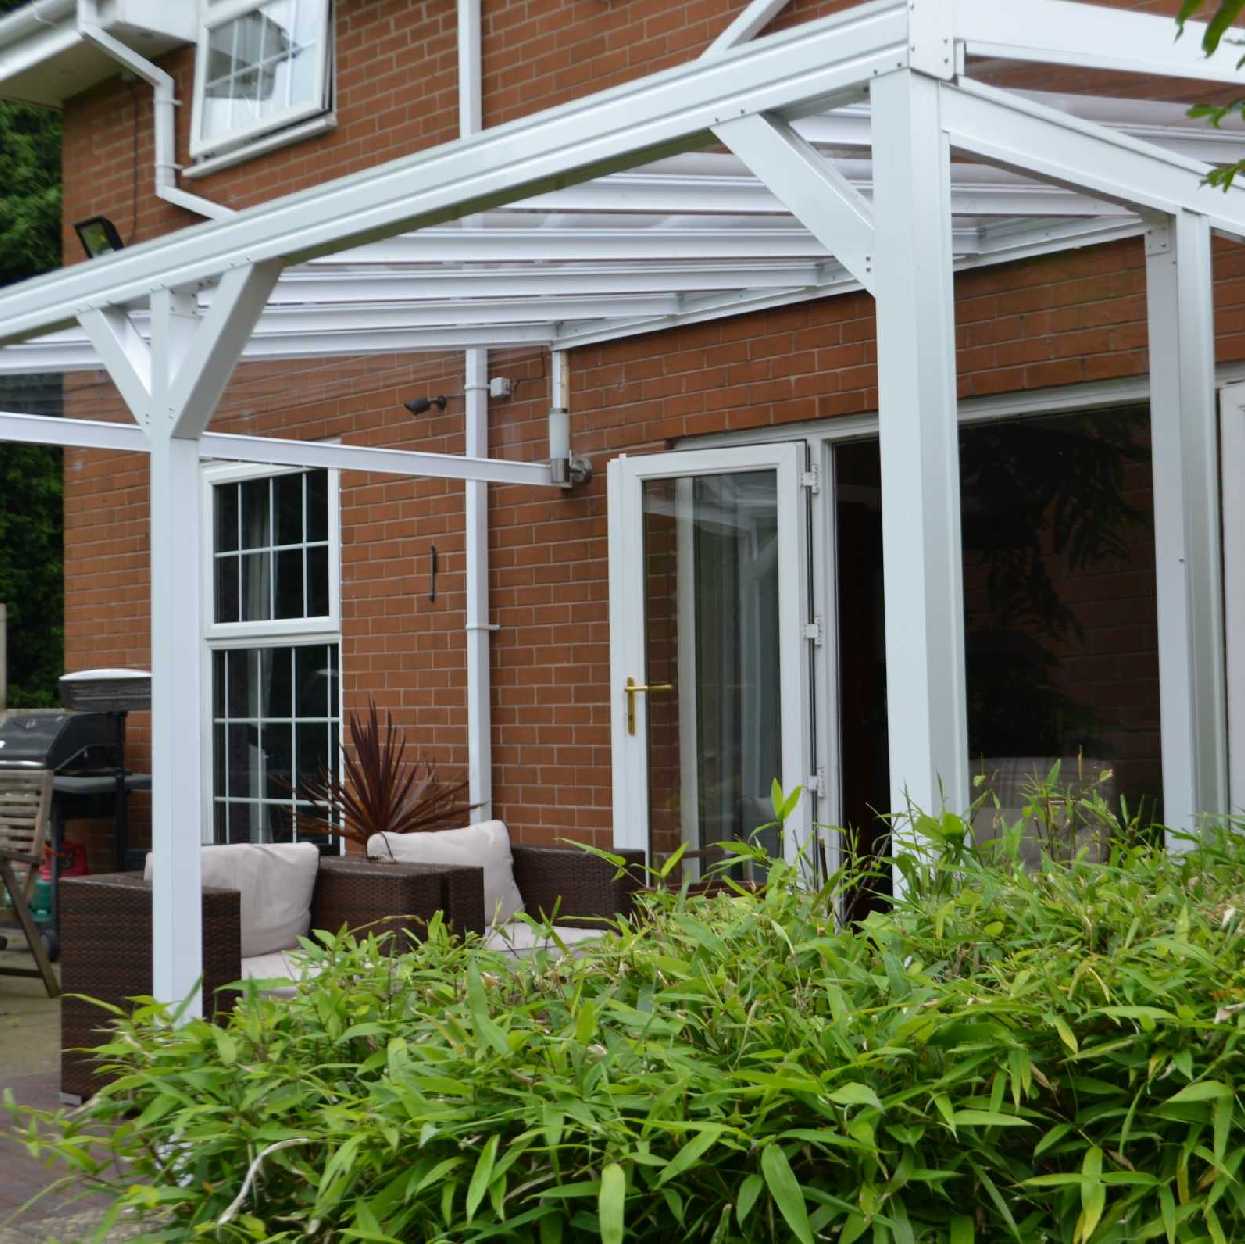 Omega Smart Lean-To Canopy, White with 6mm Glass Clear Plate Polycarbonate Glazing - 10.5m (W) x 2.0m (P), (5) Supporting Posts from Omega Build